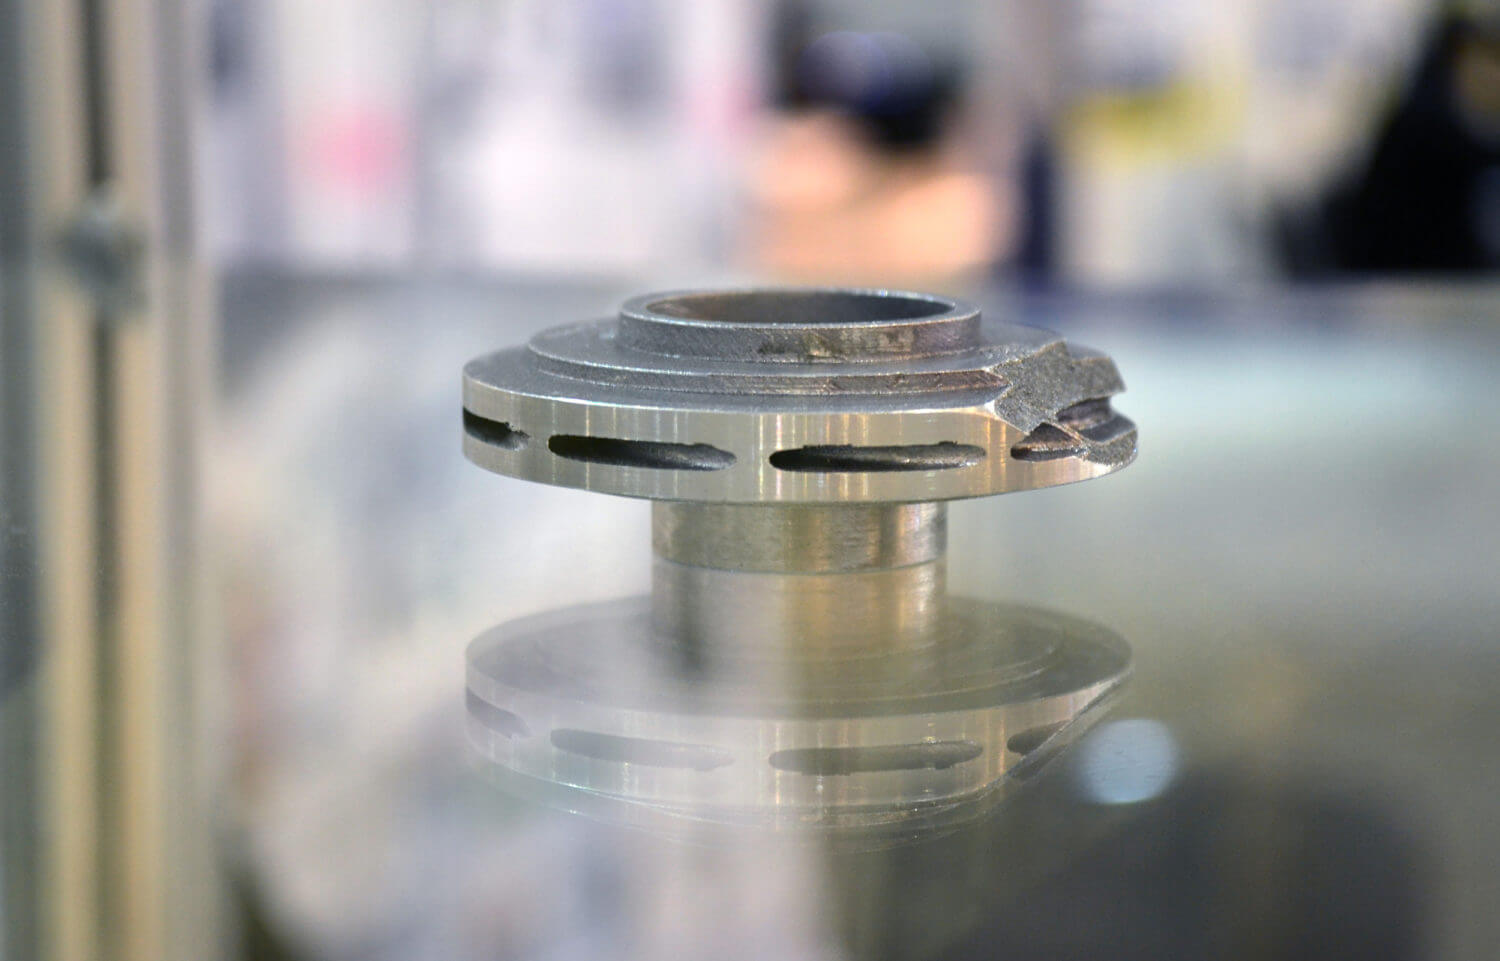 A 3D printed metal part inspected by the PrintRite3D platform. Photo via Sigma Labs.